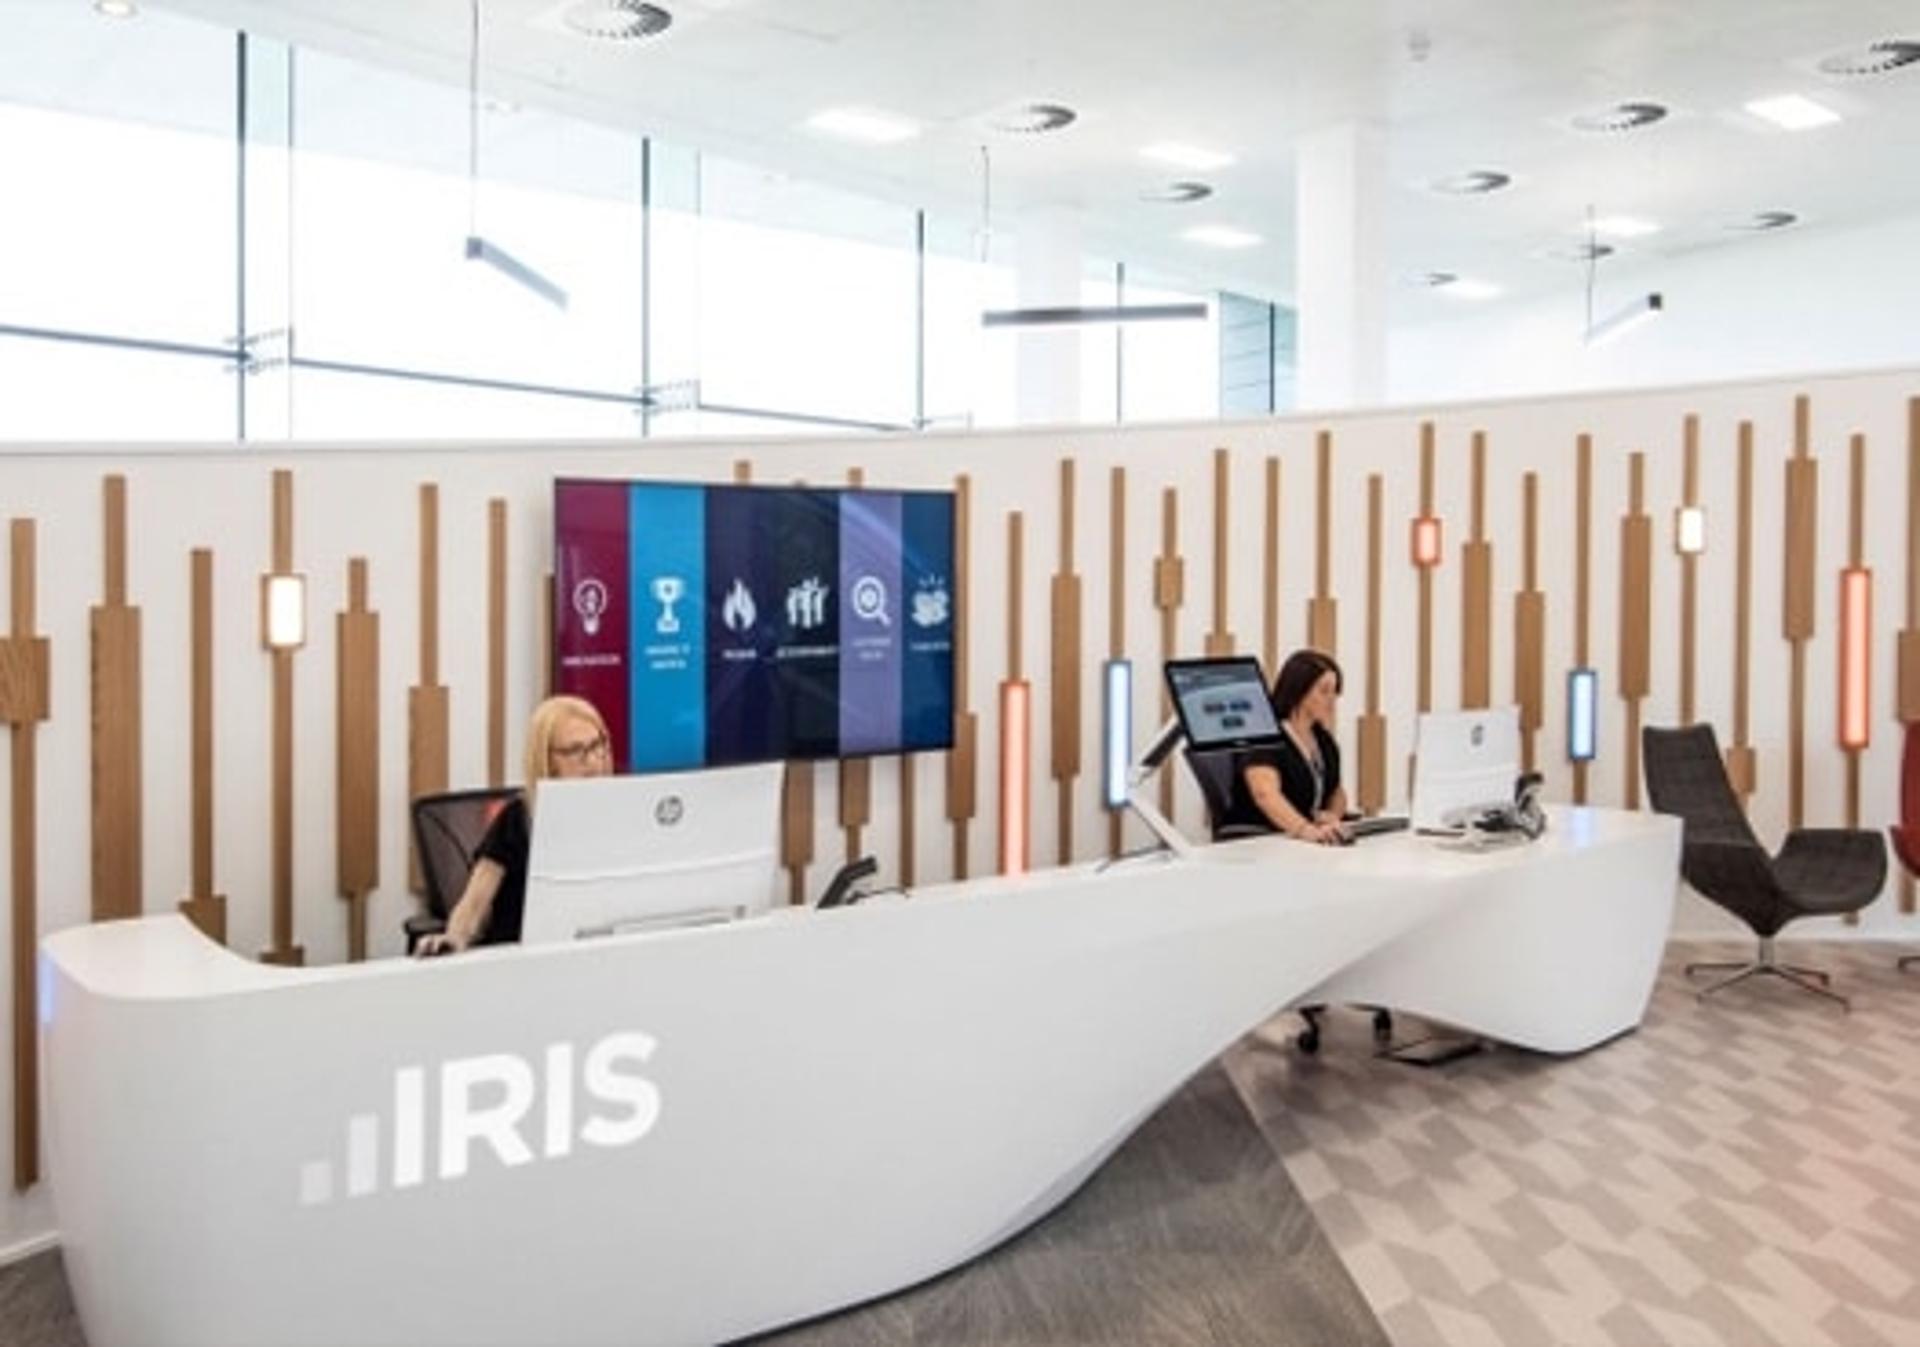 Education software group IRIS acquires ed-tech compliance and HR firm